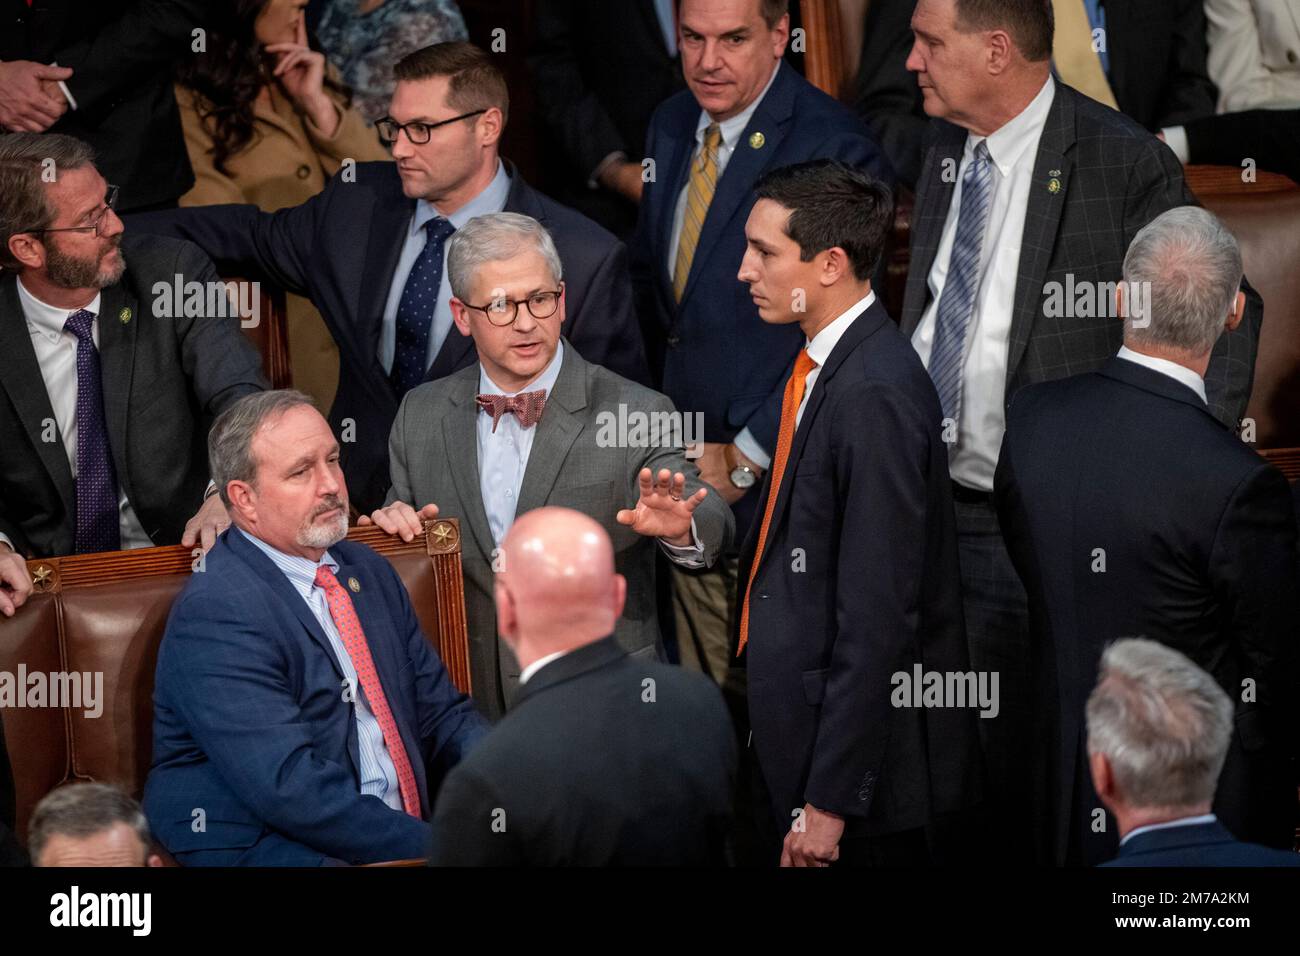 United States Representative Patrick McHenry (Republican of North Carolina) tries to calm down the tension following a verbal confrontation between United States Representative Matt Gaetz (Republican of Florida), who voted 'present, and US House Republican Leader Kevin McCarthy (Republican of California), after Mr. McCarthy failed to get the votes he needed for the Speakership, on the 14th vote attempt, at the US Capitol, in Washington, DC, Saturday, January 7, 2023. Credit: Rod Lamkey/CNP (RESTRICTION: NO New York or New Jersey Newspapers or newspapers within a 75 mile radius of New York C Stock Photo